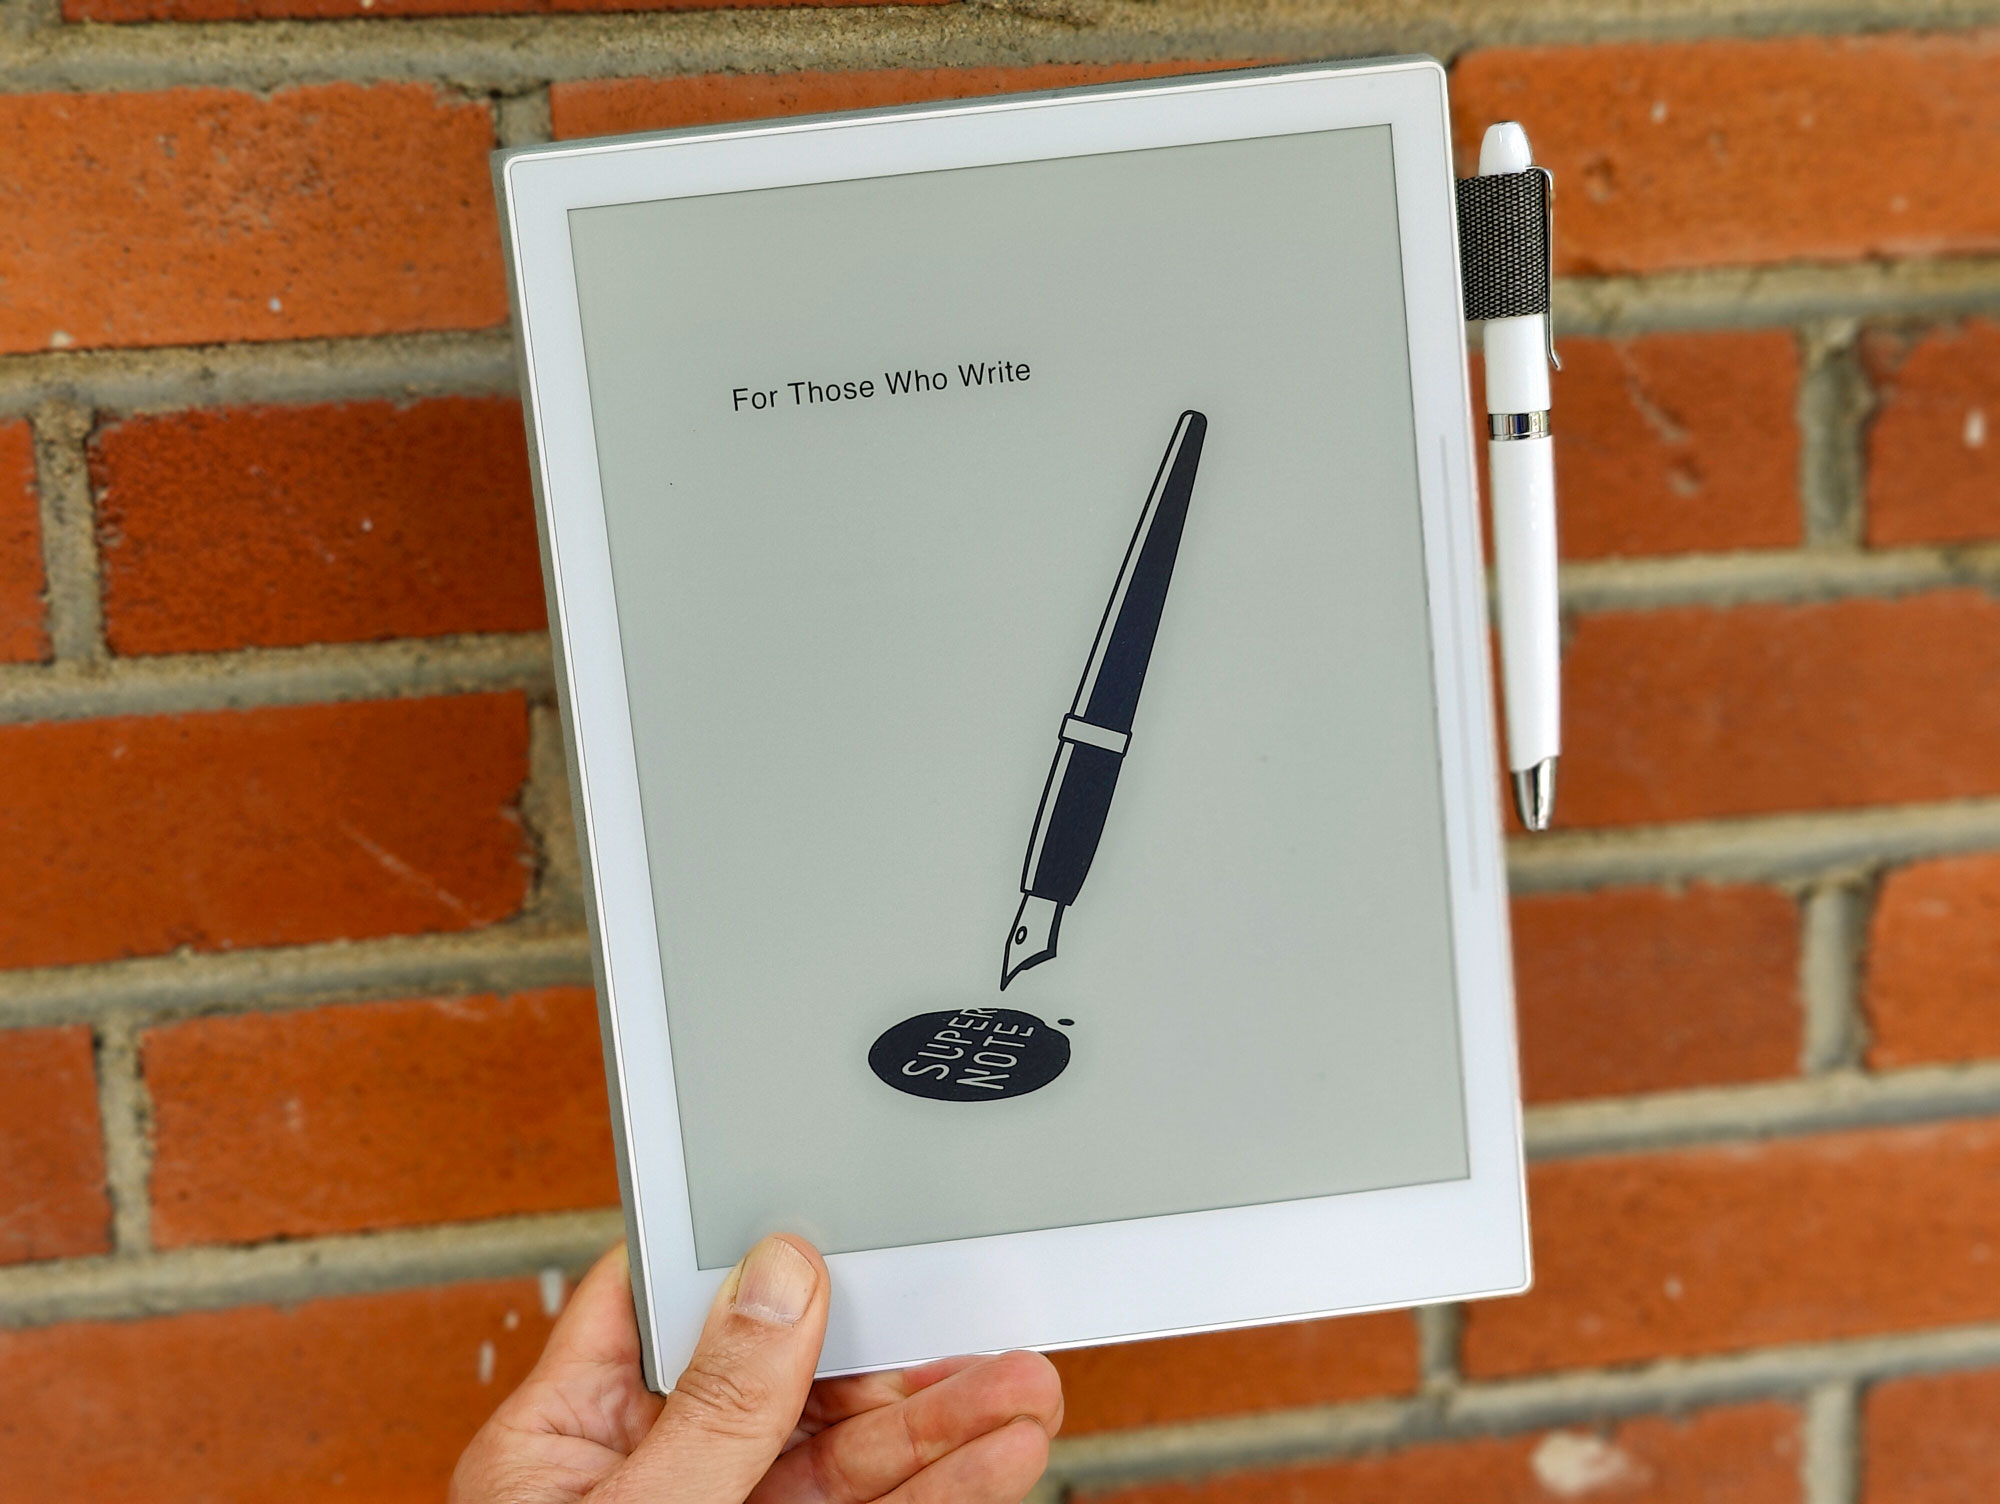 Supernote a5X stylus stylet ratta test review essai